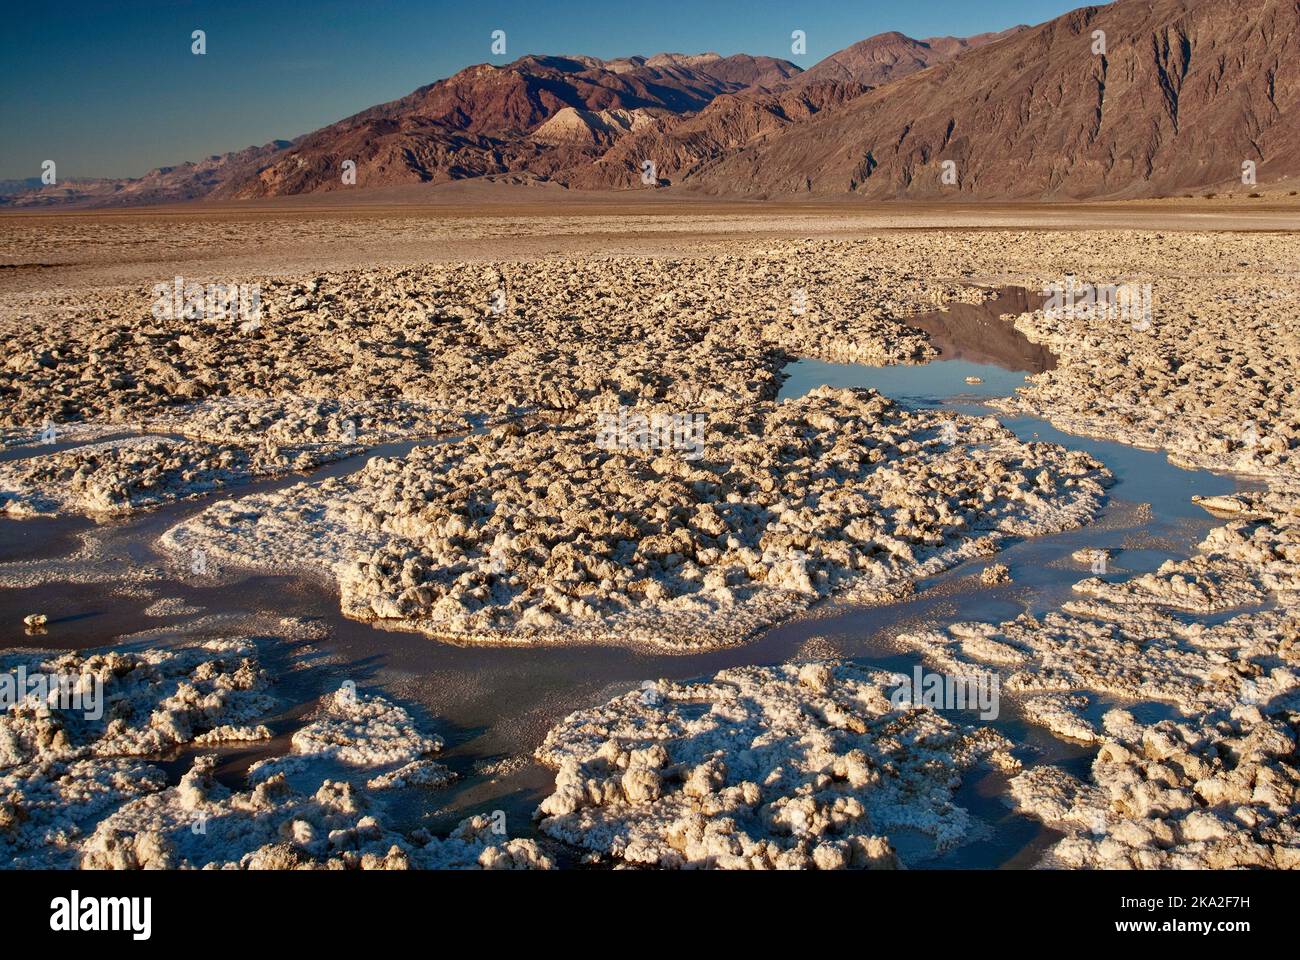 Salt crust and recent rain water at Mojave Desert, sunset, Black Mountains in distance from Mormon Point in Death Valley Natl Park, California, USA Stock Photo